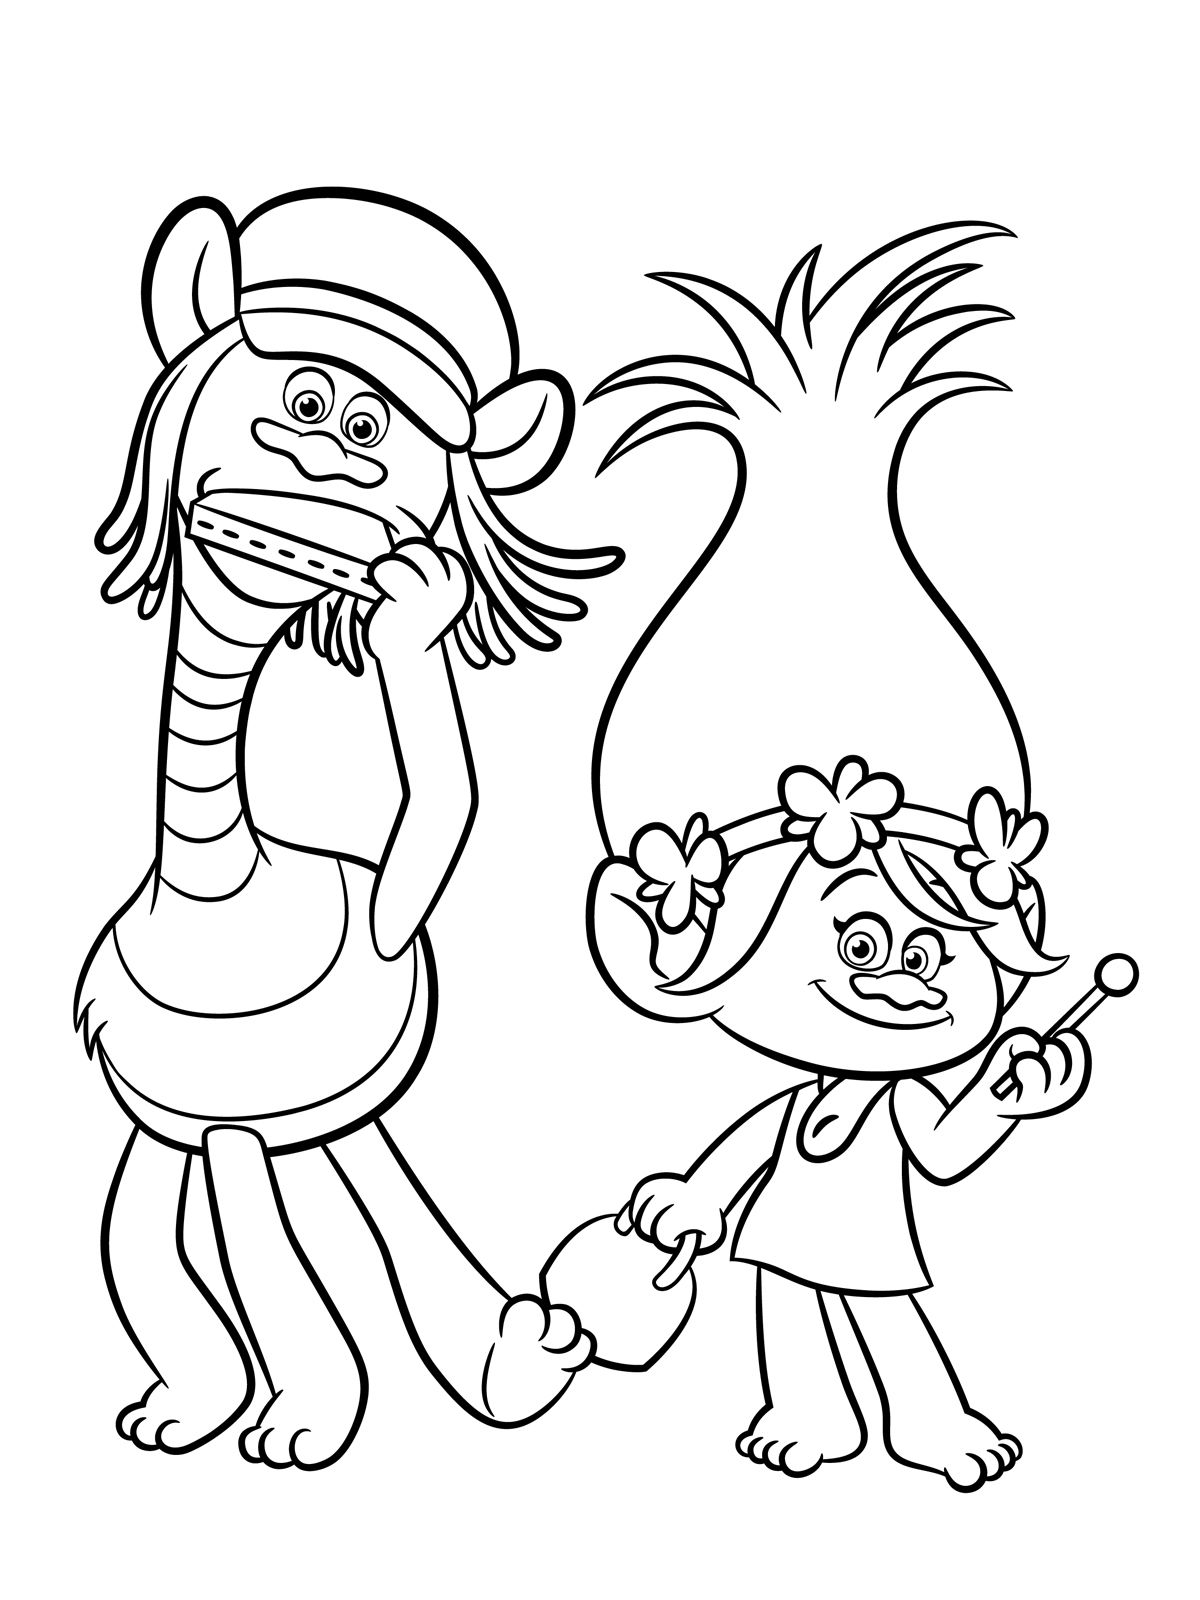 Download Disney Coloring Pages Best Coloring Pages For Kids